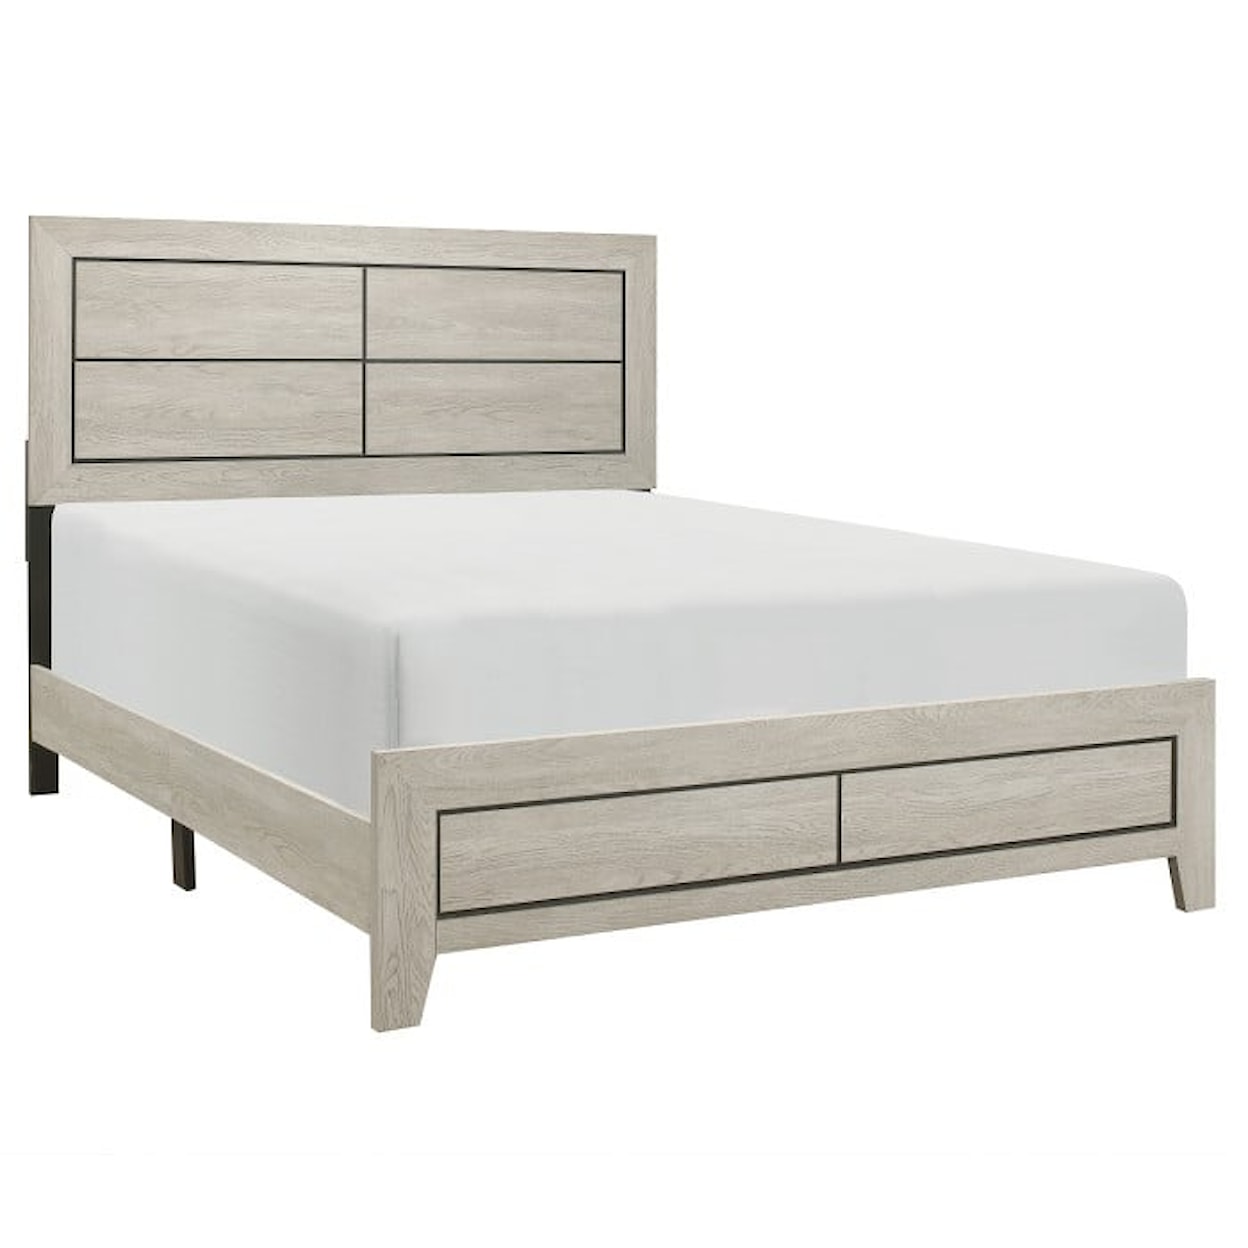 Homelegance Quinby Queen Bed